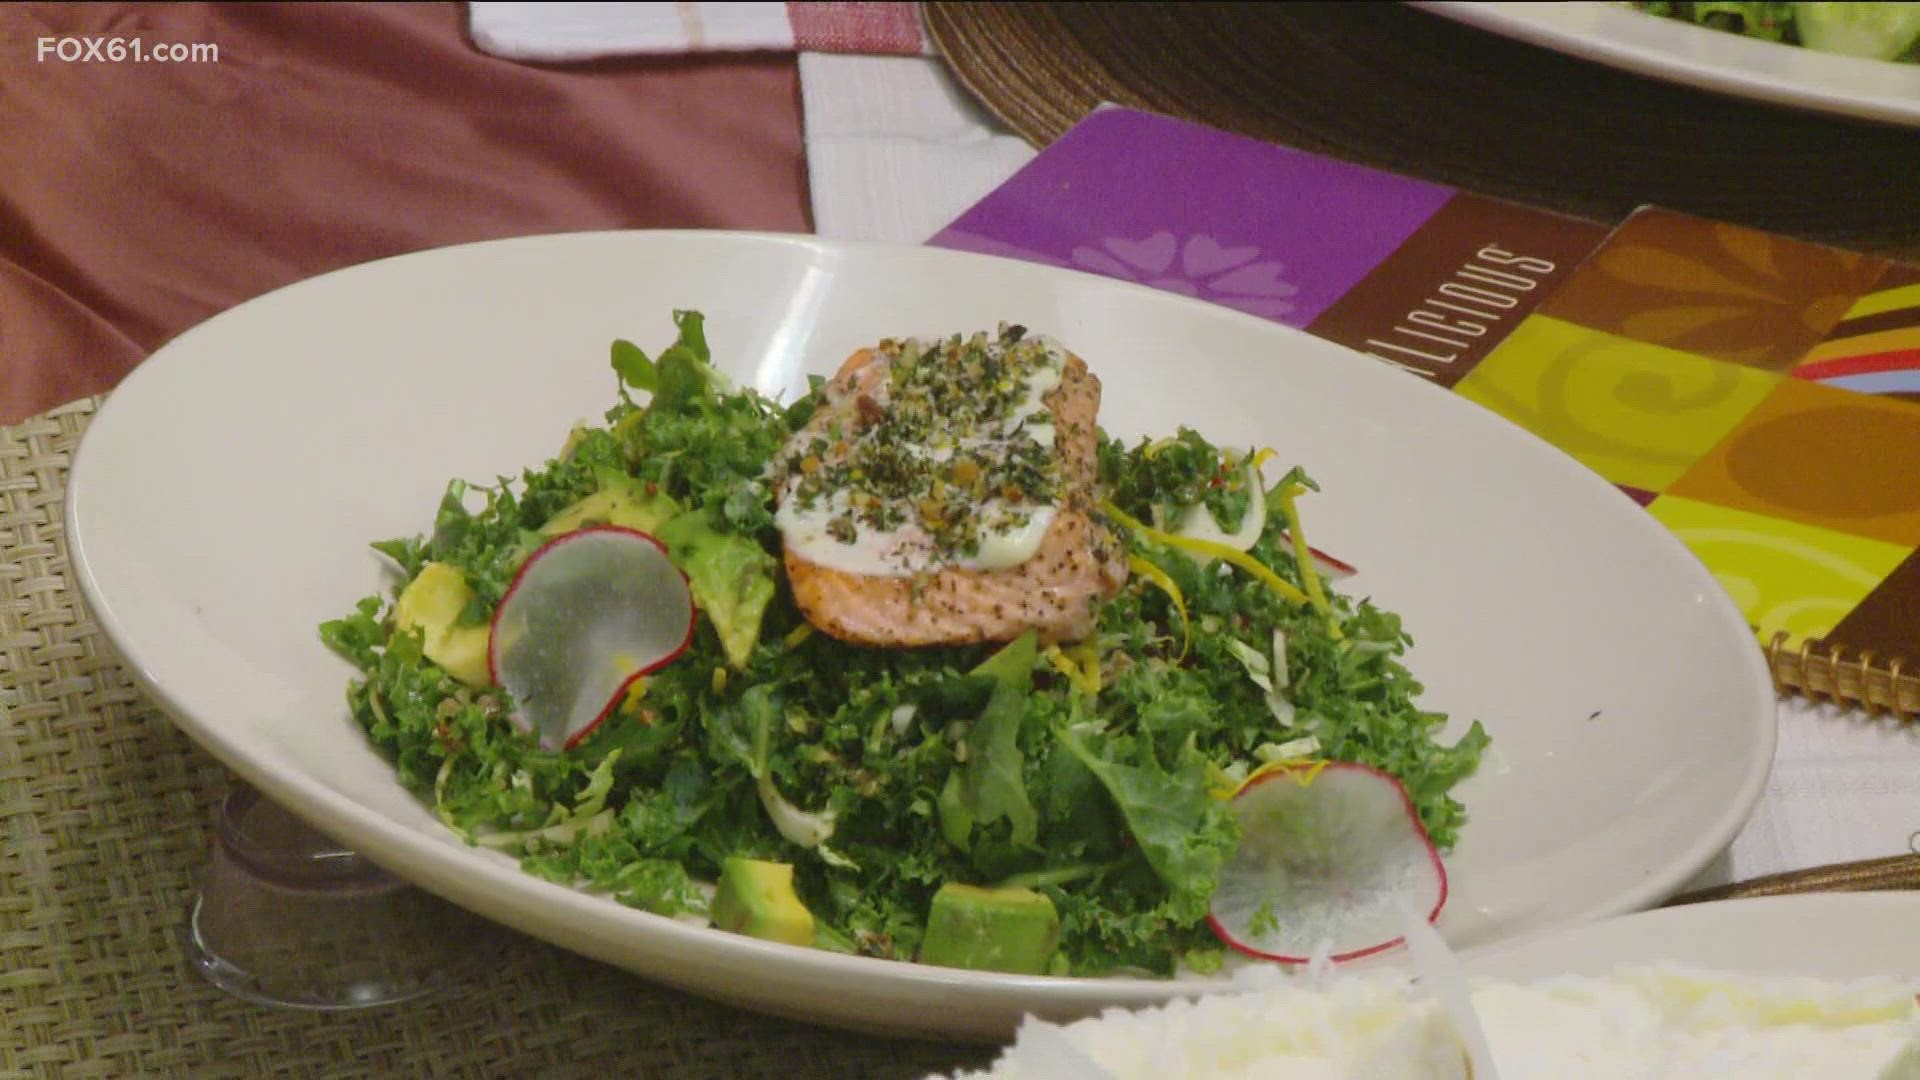 Ever wanted to make a Cheesecake Factory menu item at home? Check out the recipe for their almond-crusted salmon salad!